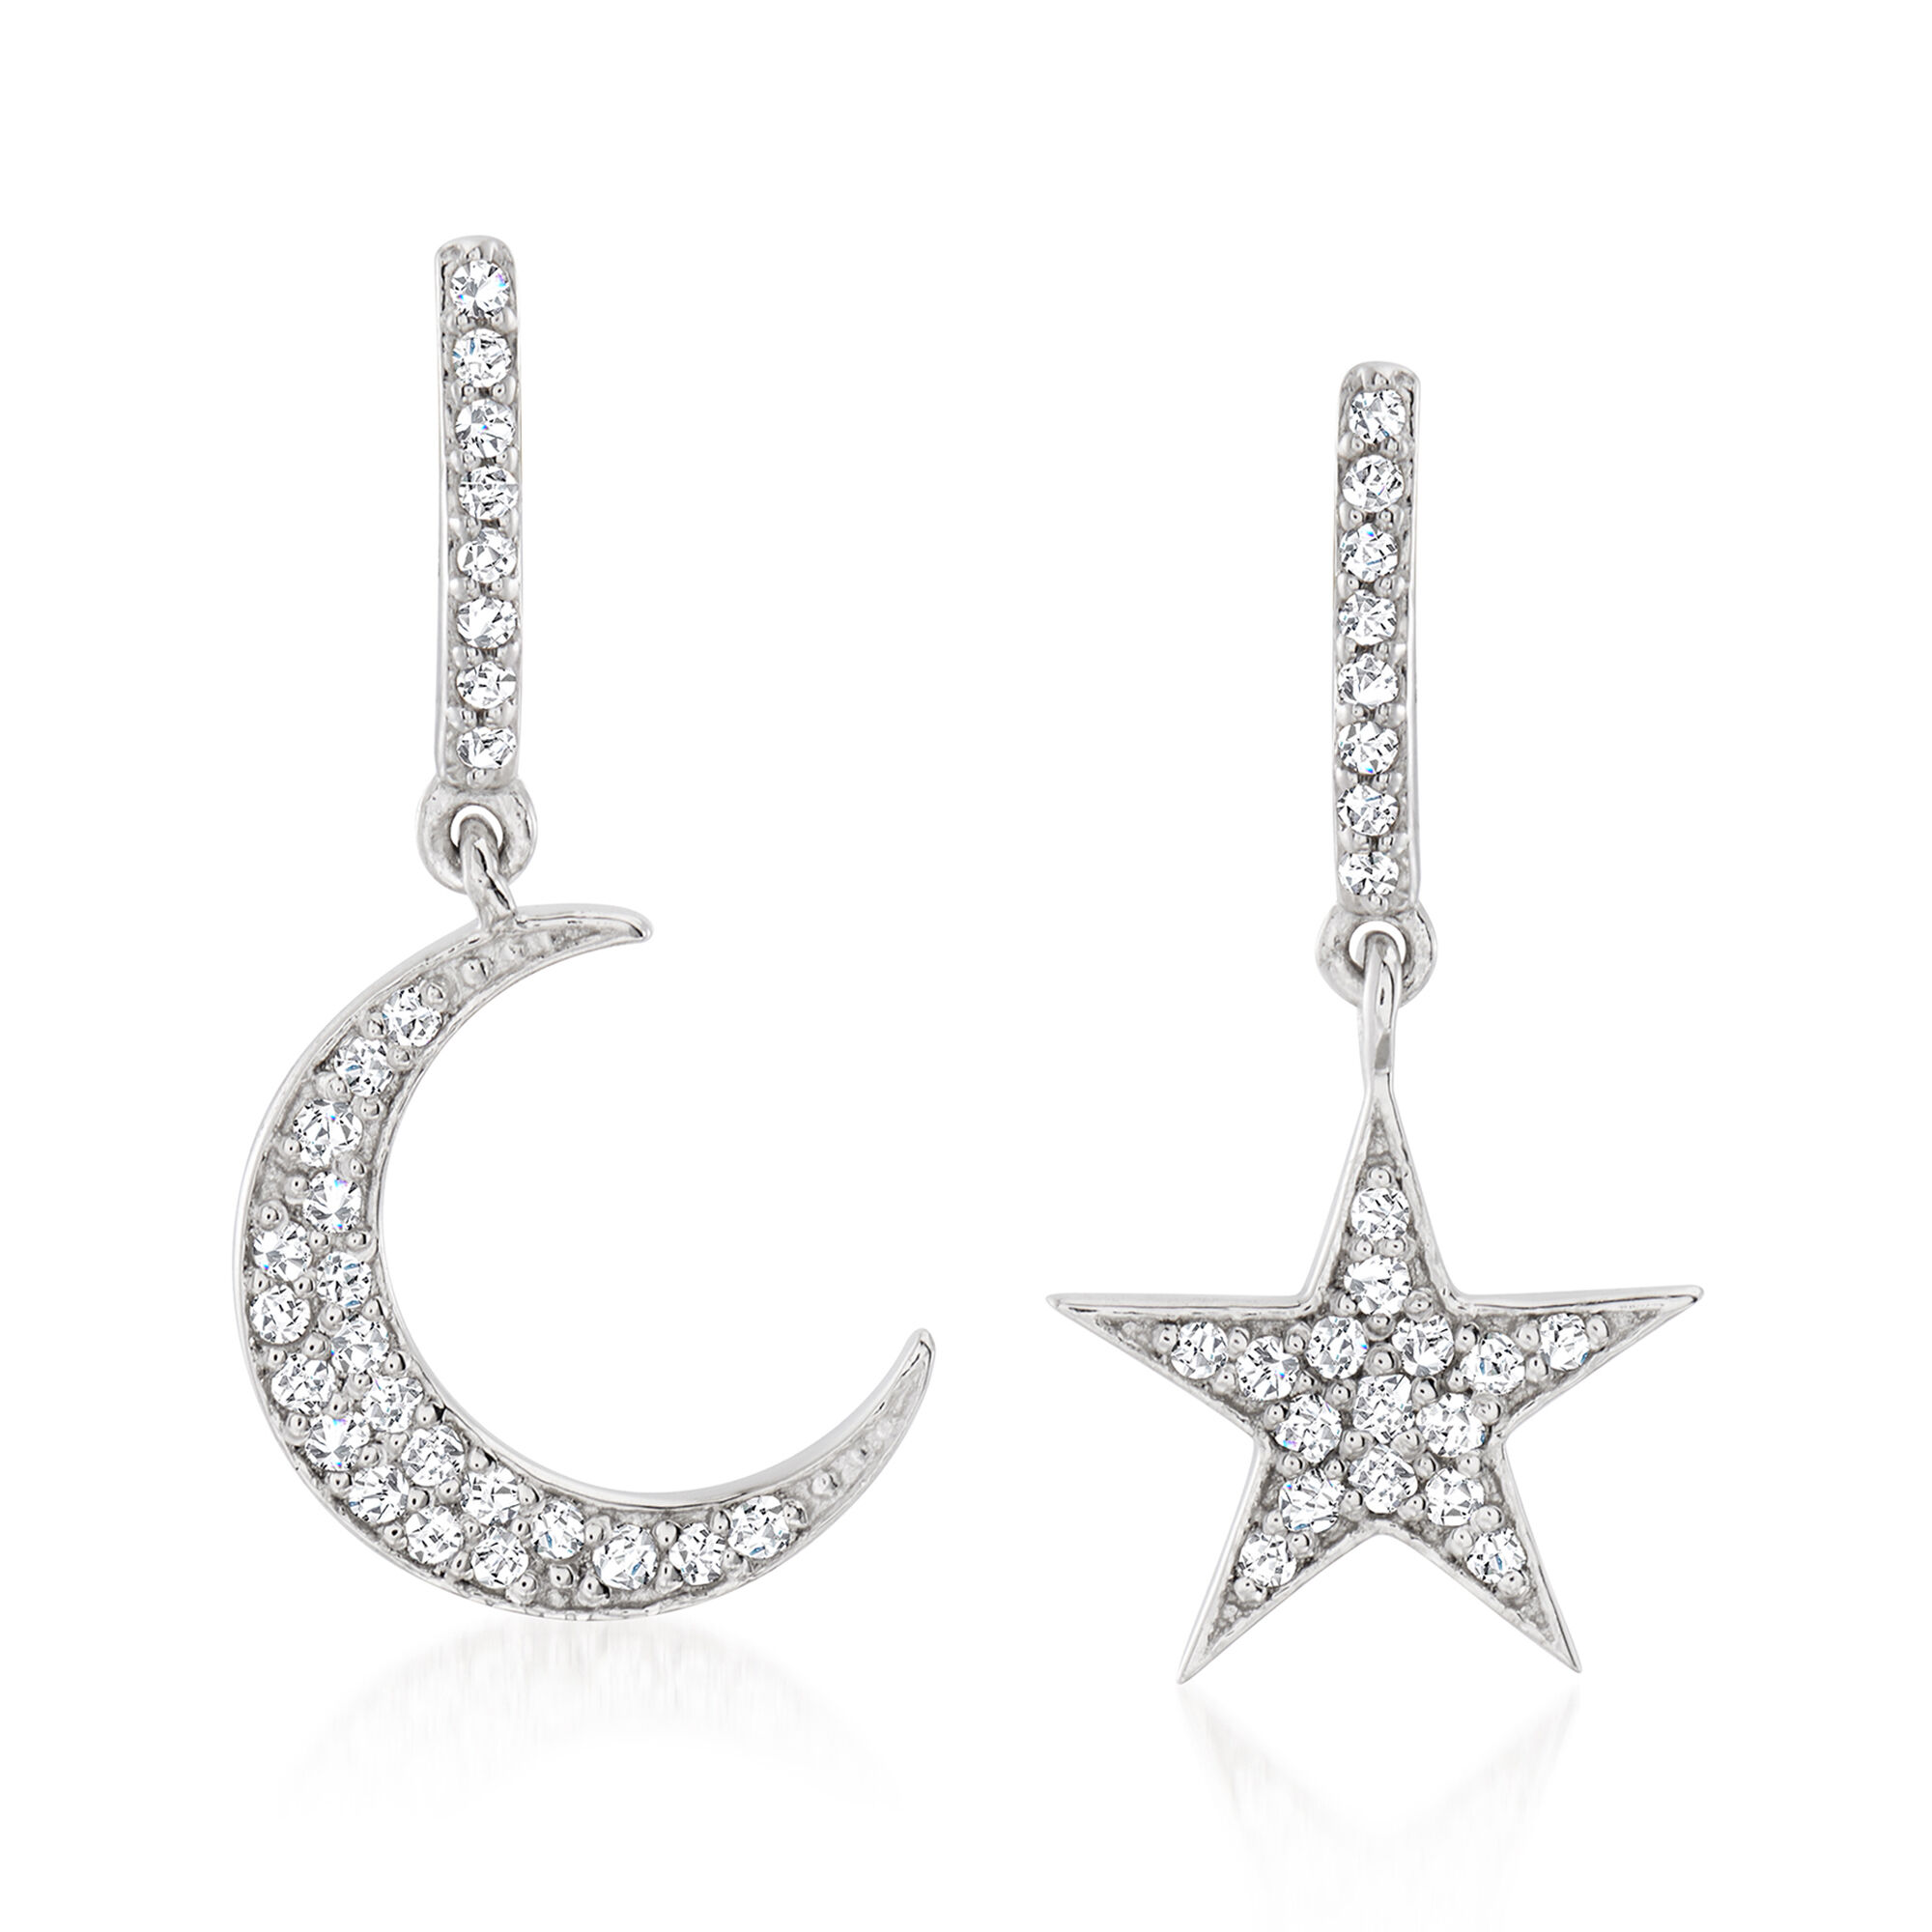 .29 ct. t.w. White Topaz Star and Moon Mismatched Drop Earrings in 